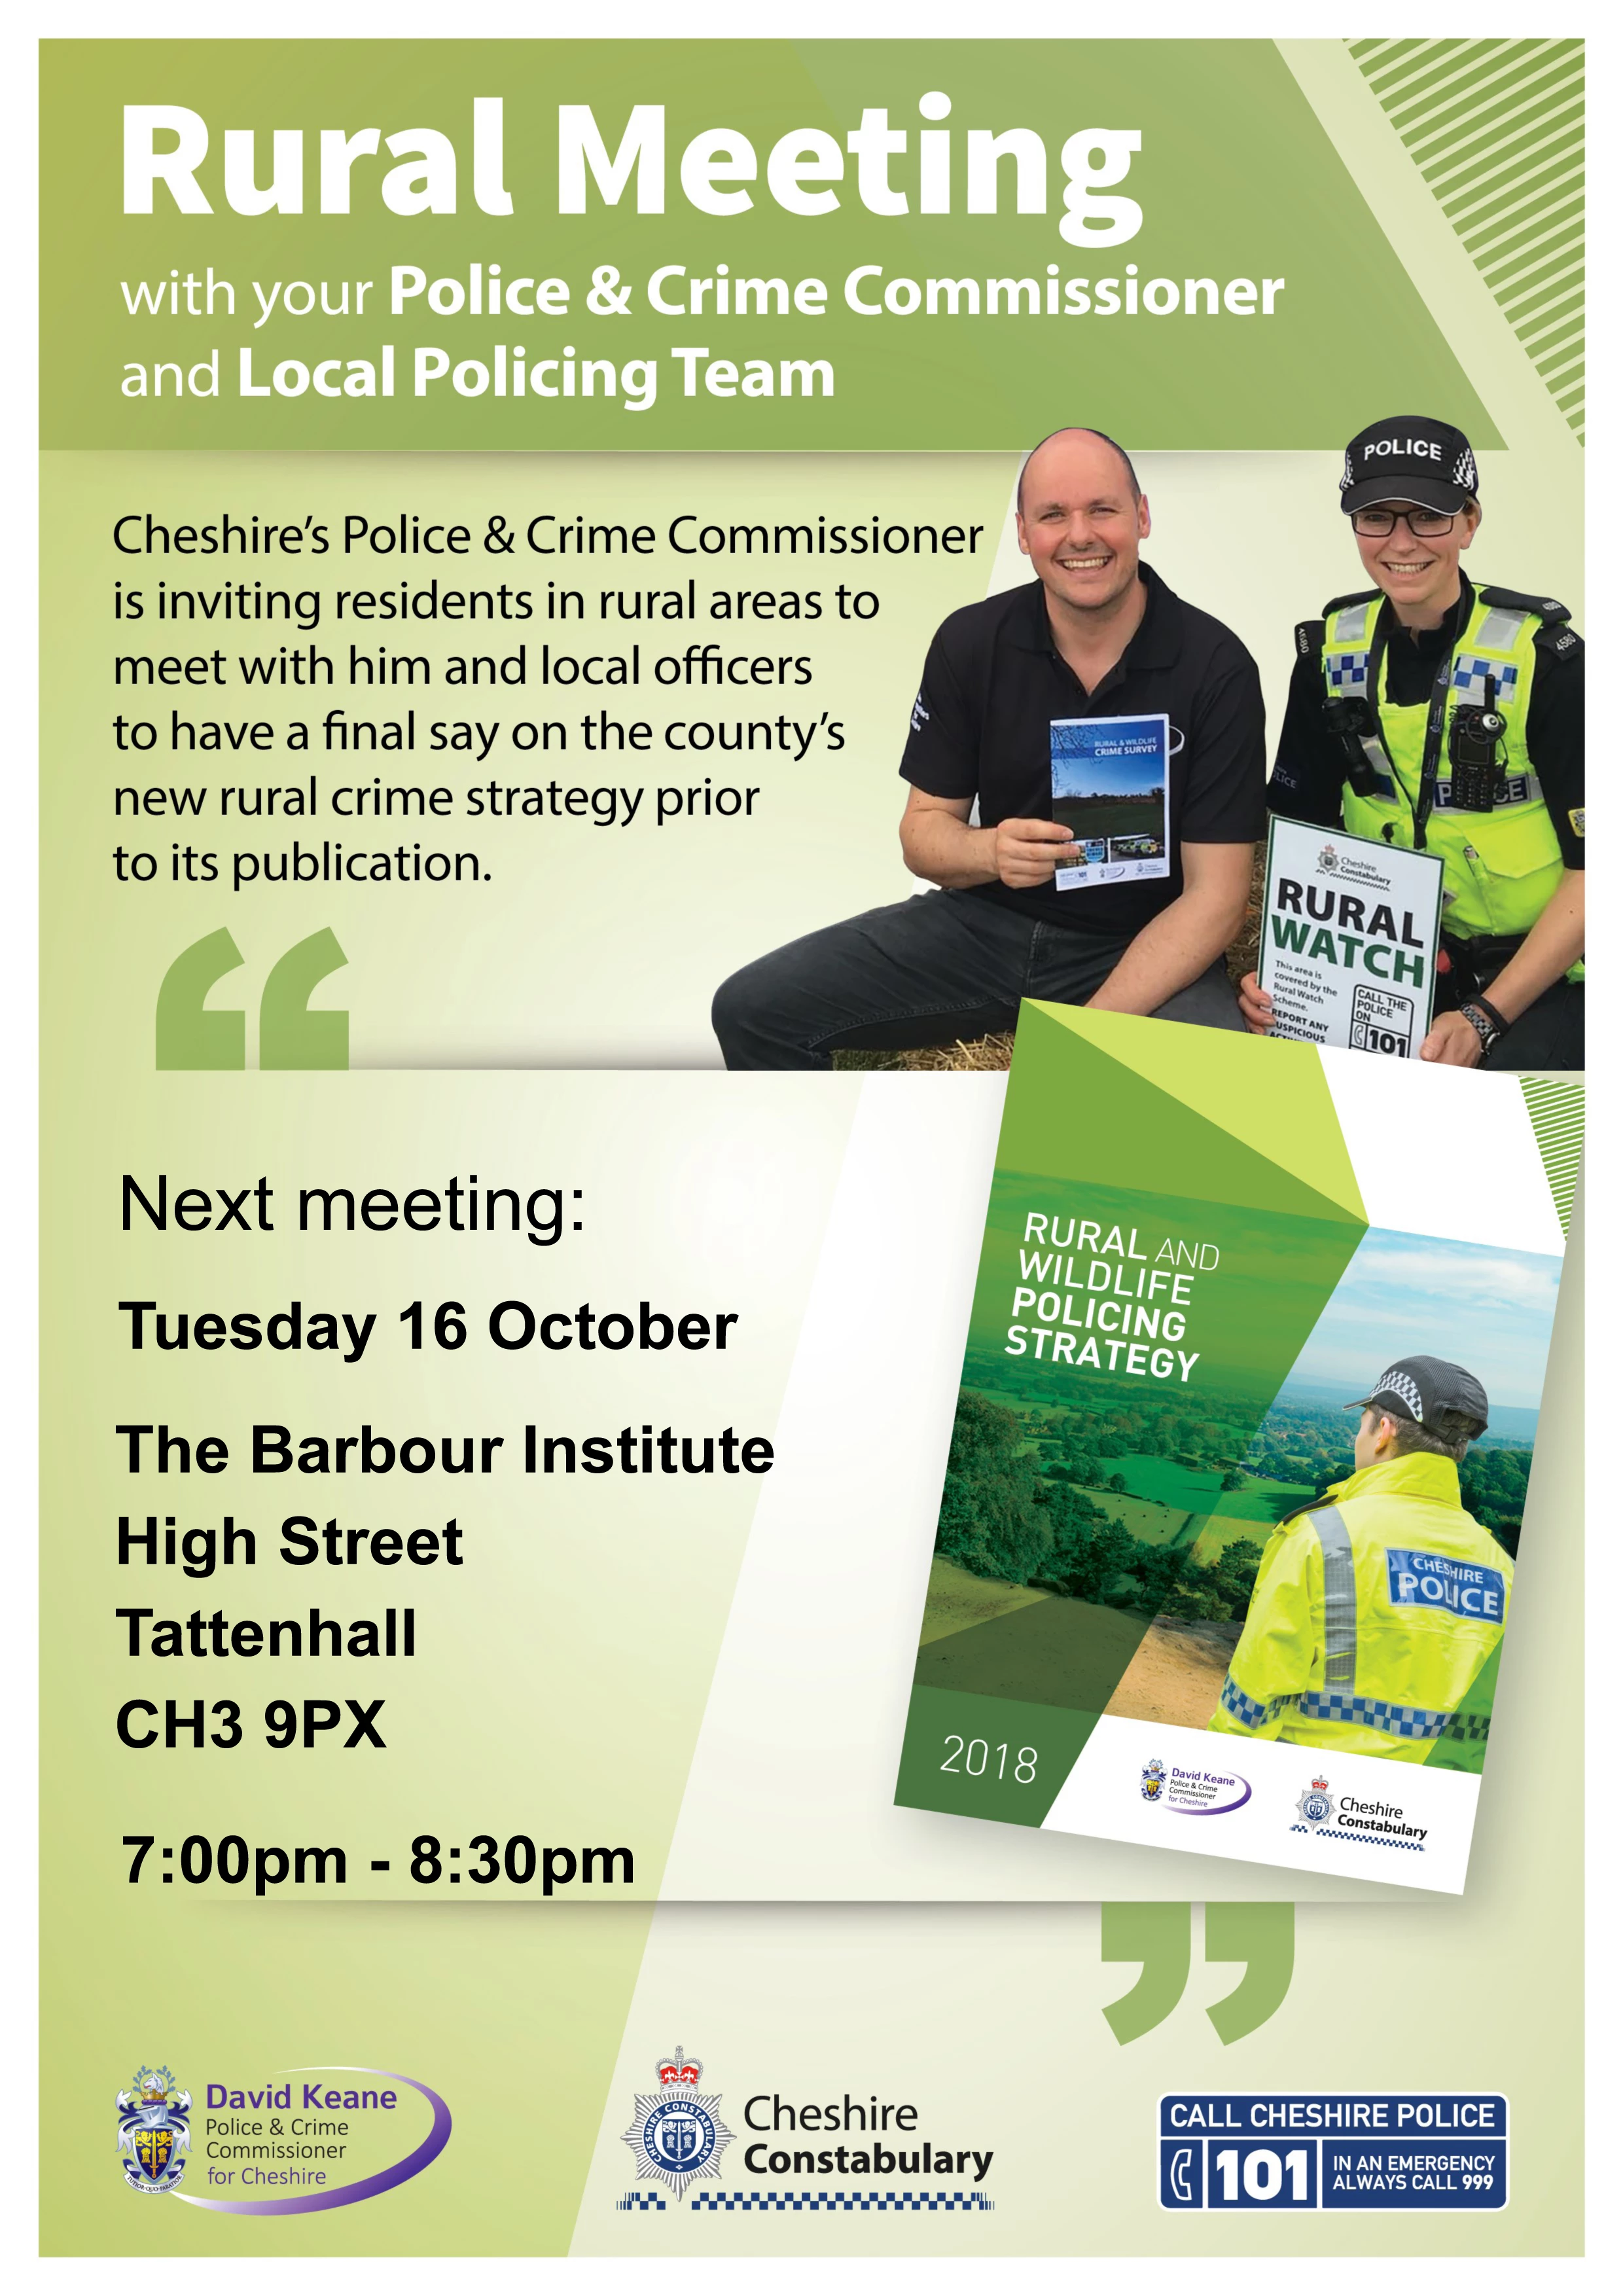 pcc lpt rural meeting poster template   chester and e port